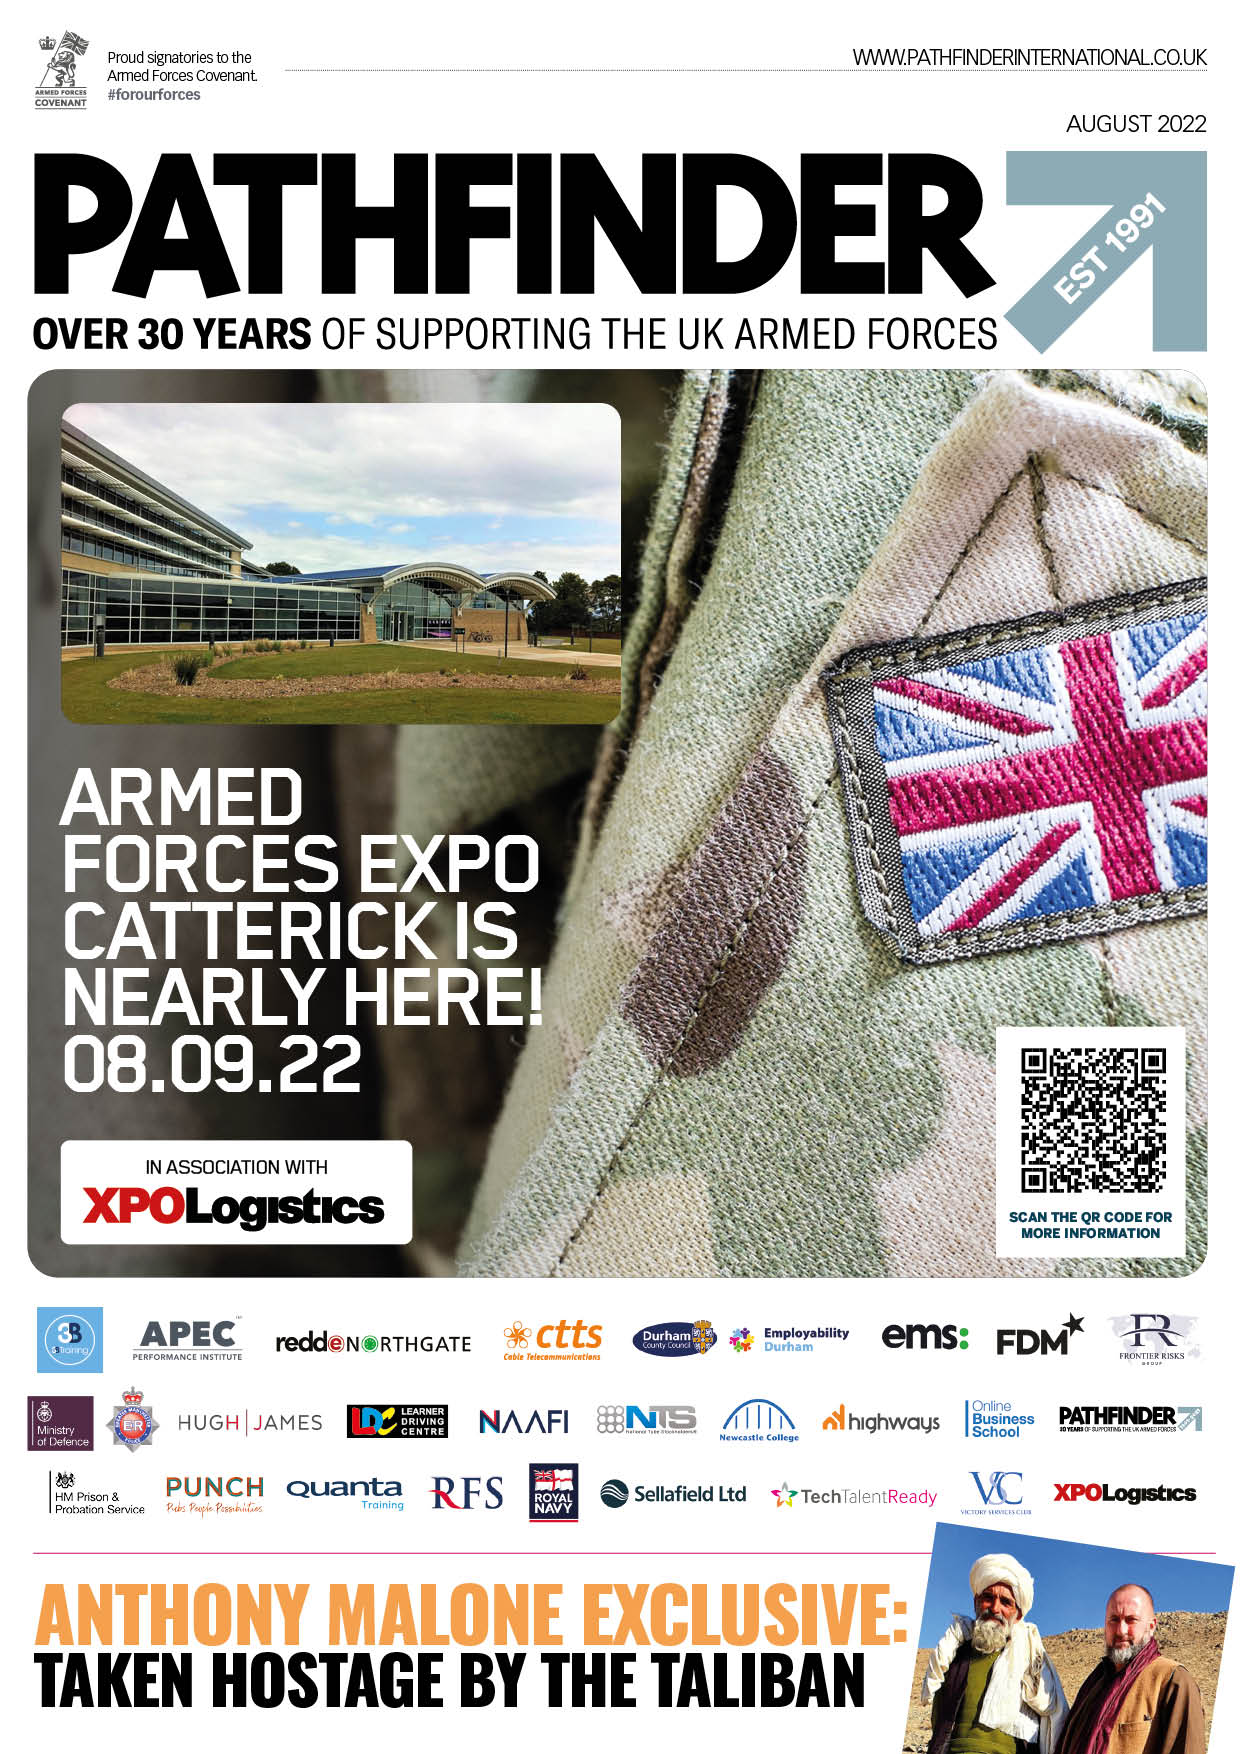 Armed Forces Expo Catterick – Meet The Exhibitors – Redden Northgate (AUXILIIS)